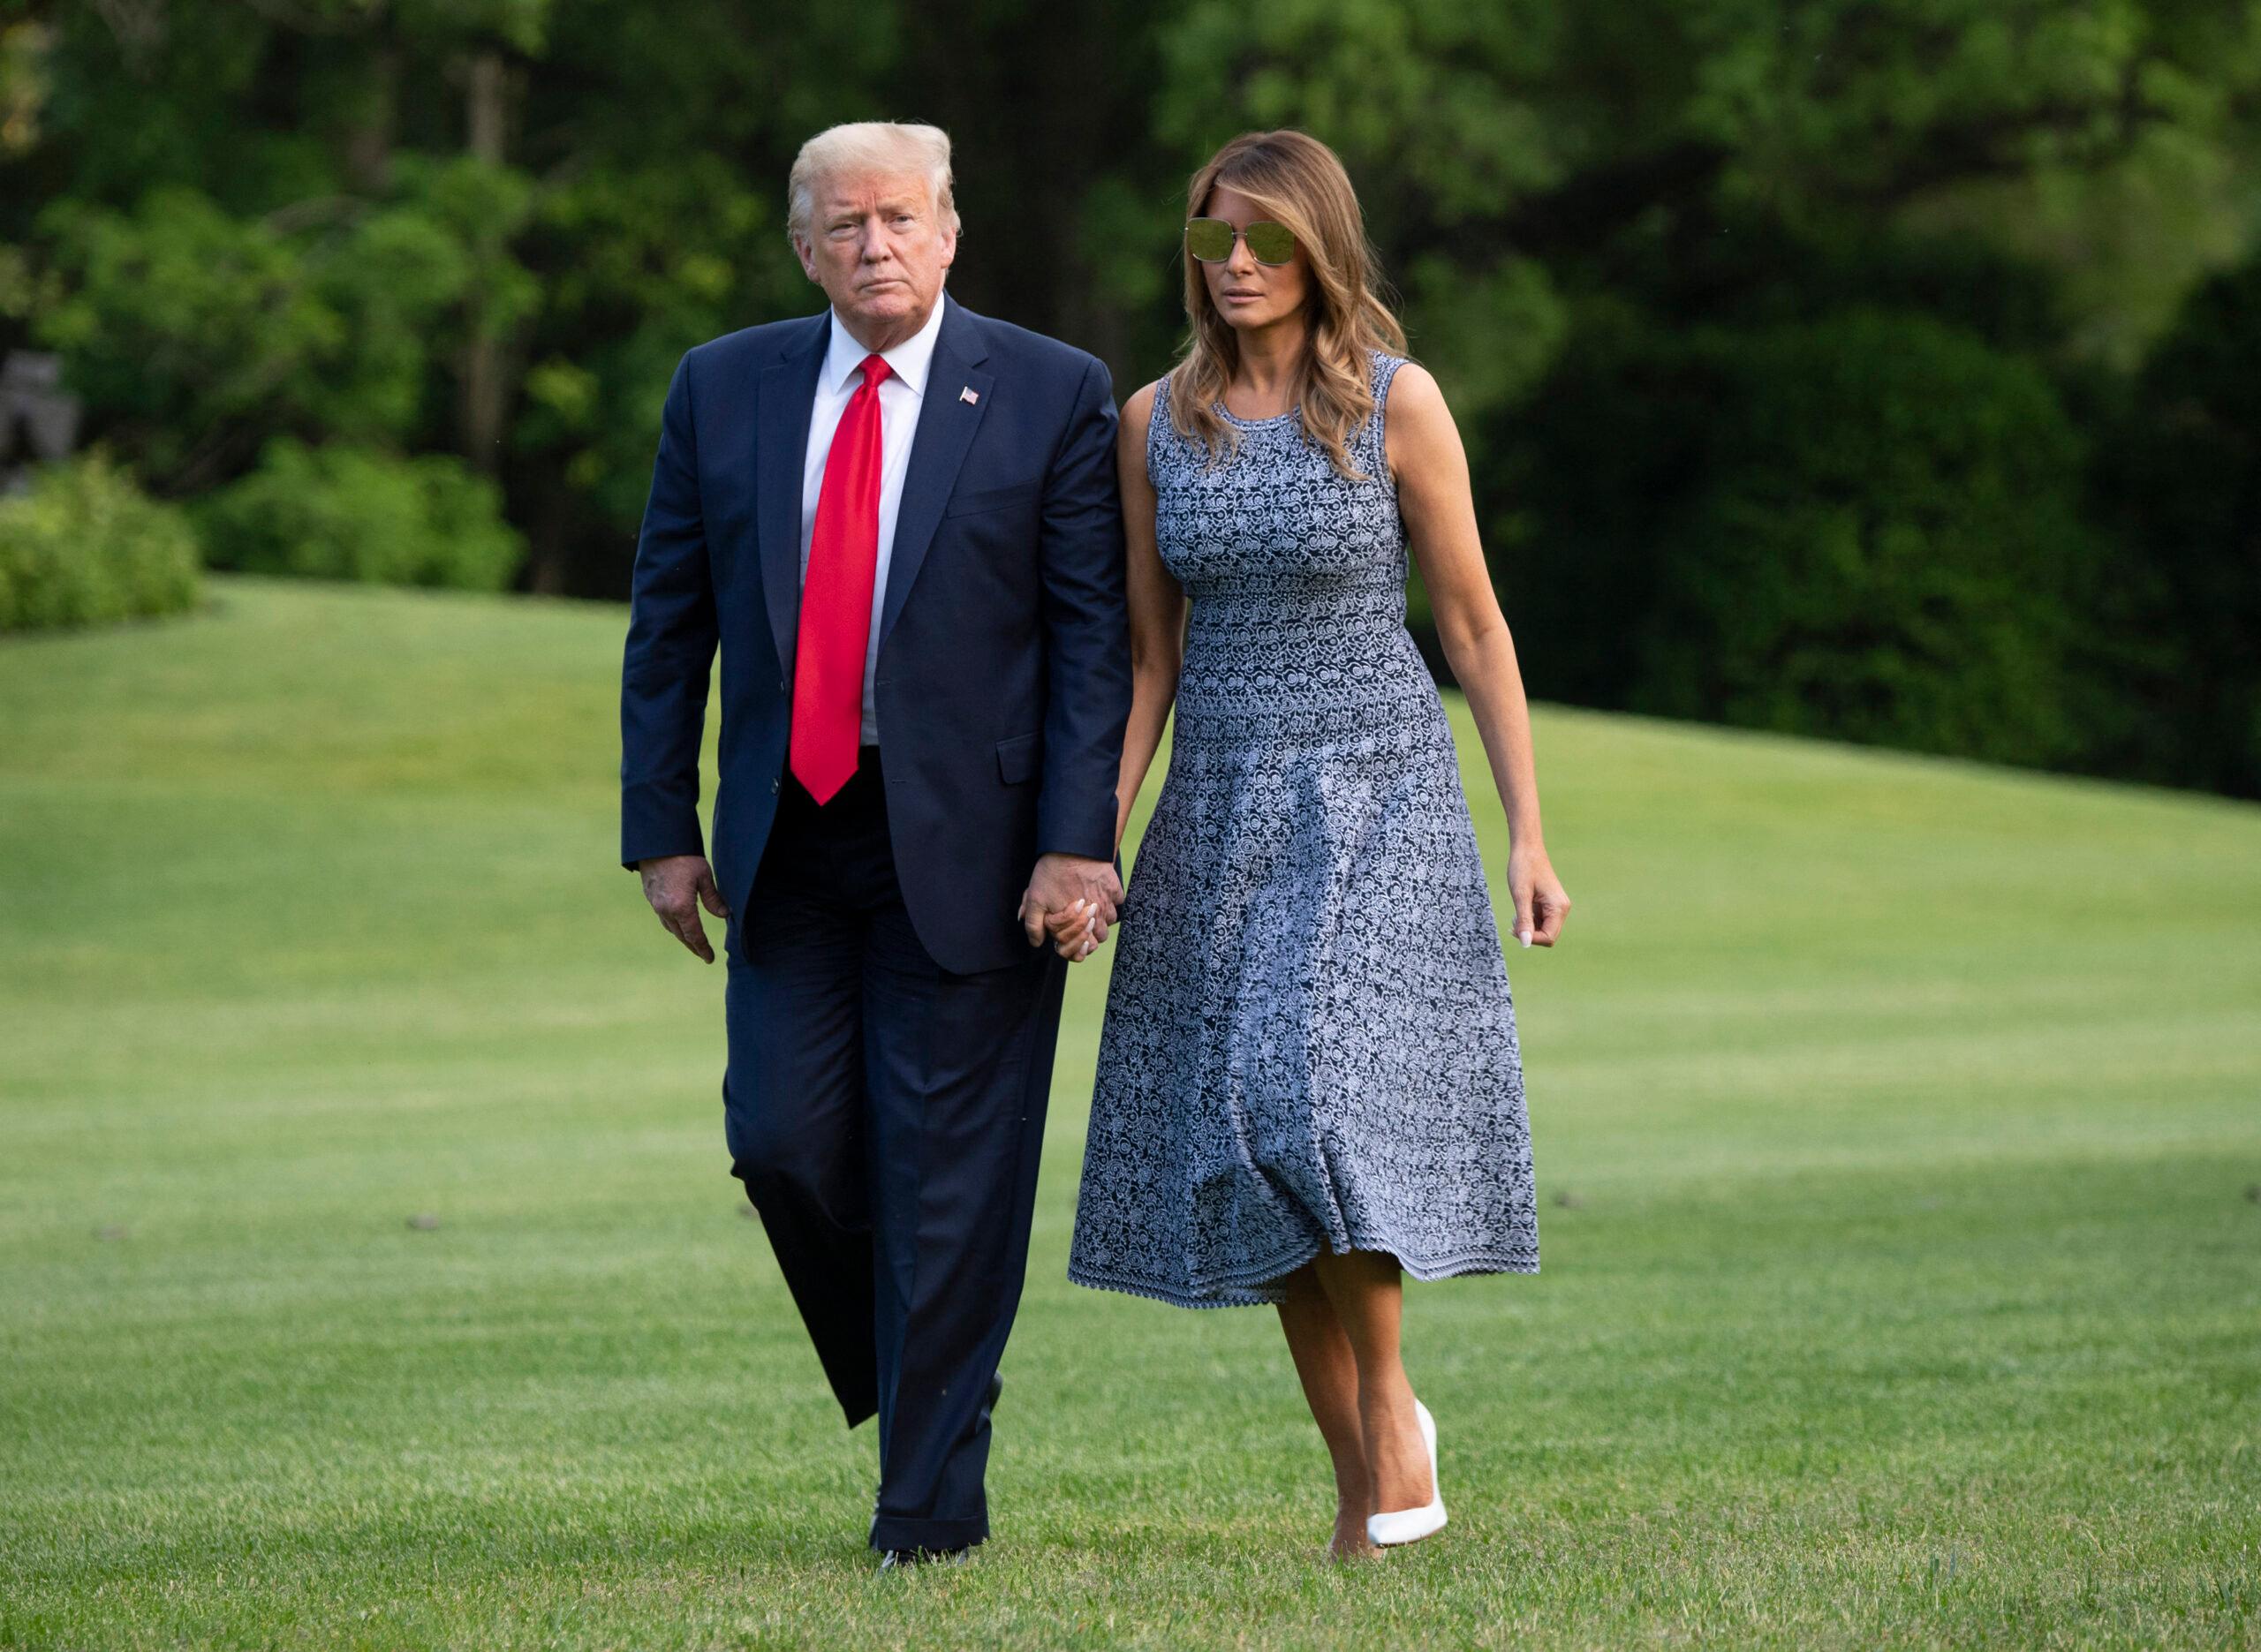 How Melania Trump's Testimony In Hush Money Trial Could Be 'Powerful' Support For Her Husband